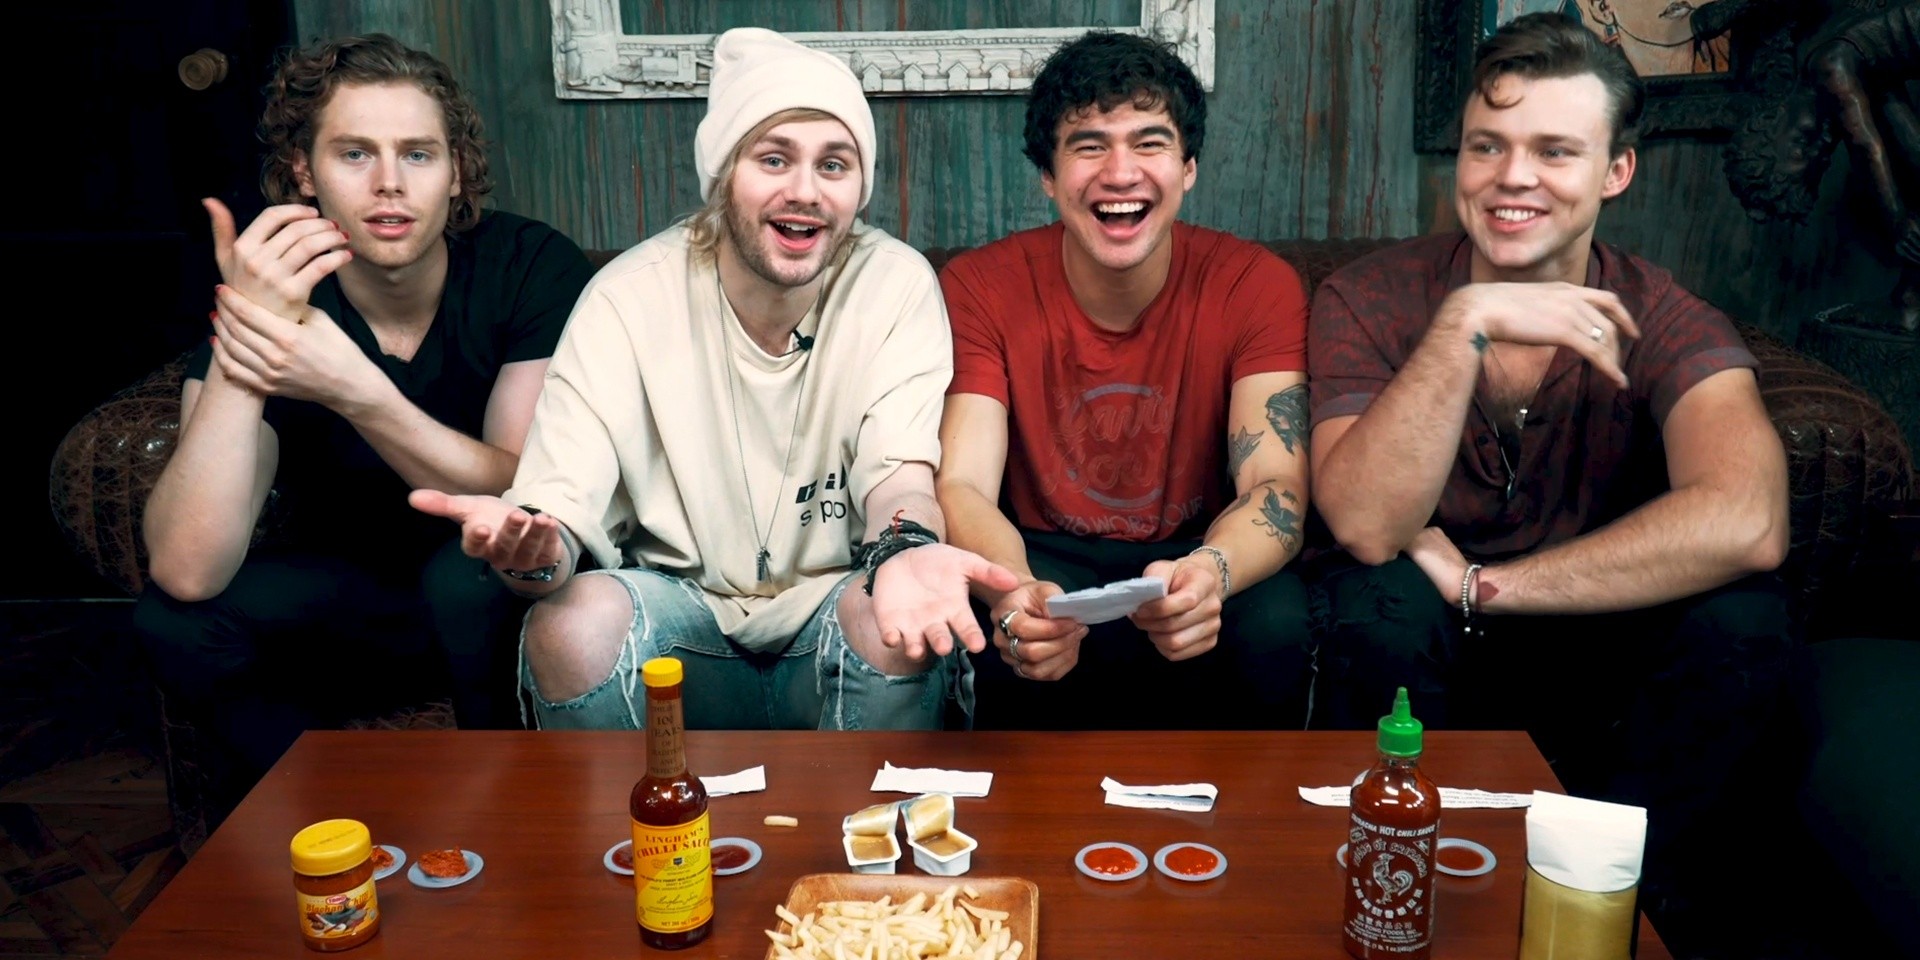 5 Seconds of Summer sample five Singaporean sauces and answer questions about Youngblood – watch